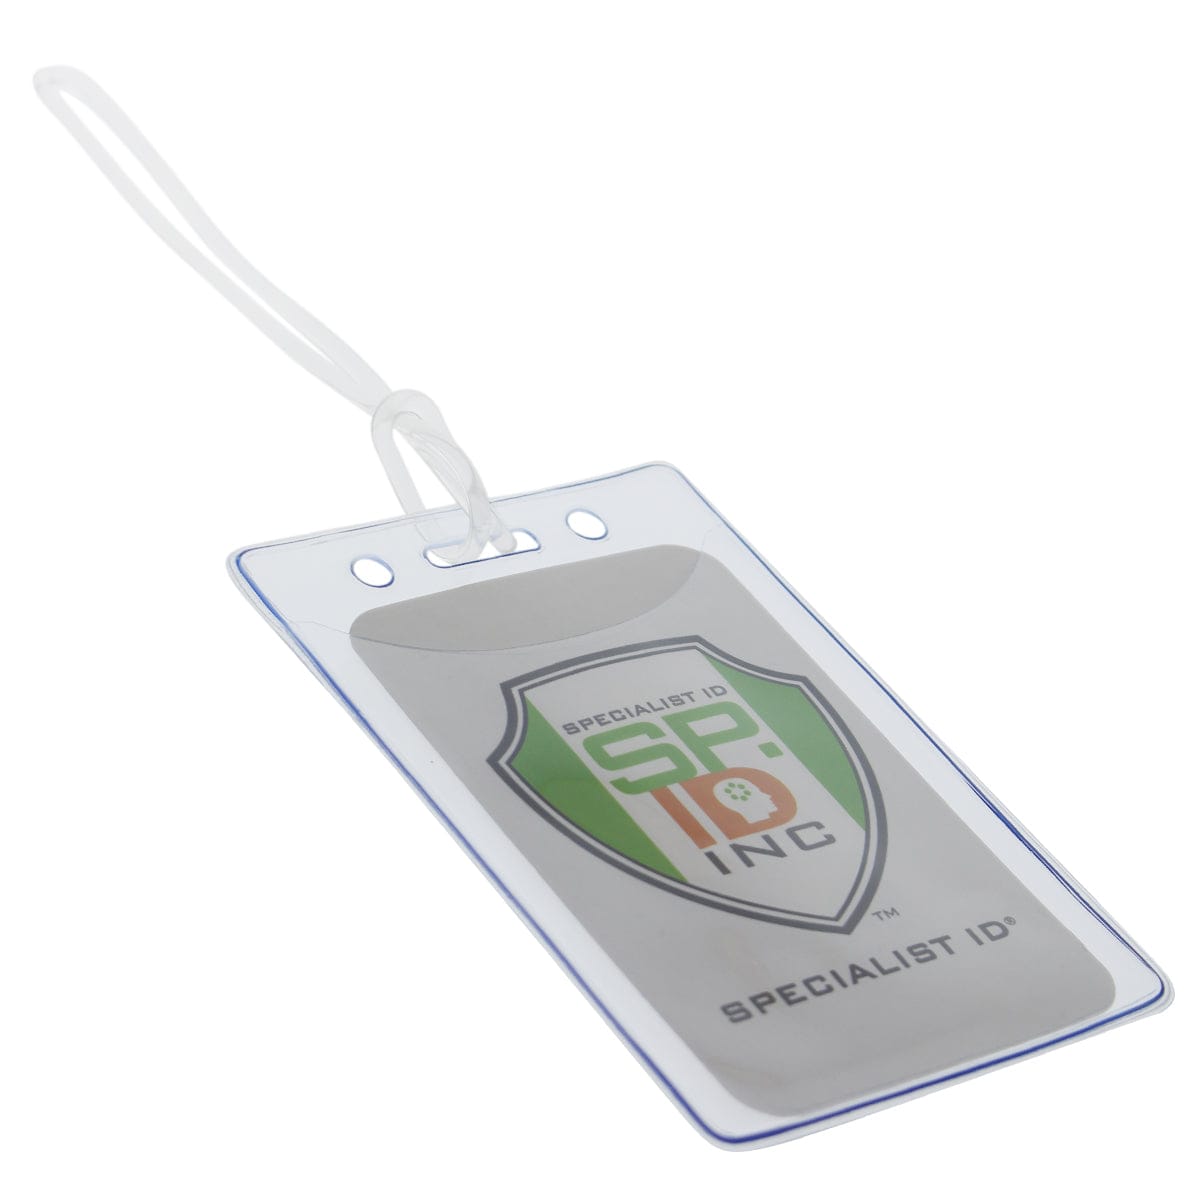 Clear Plastic Luggage Identification Tags with Loops Included - Business Card or Photo Insert Bag Tags - Great for Travel, Student ID’s by Specialist ID